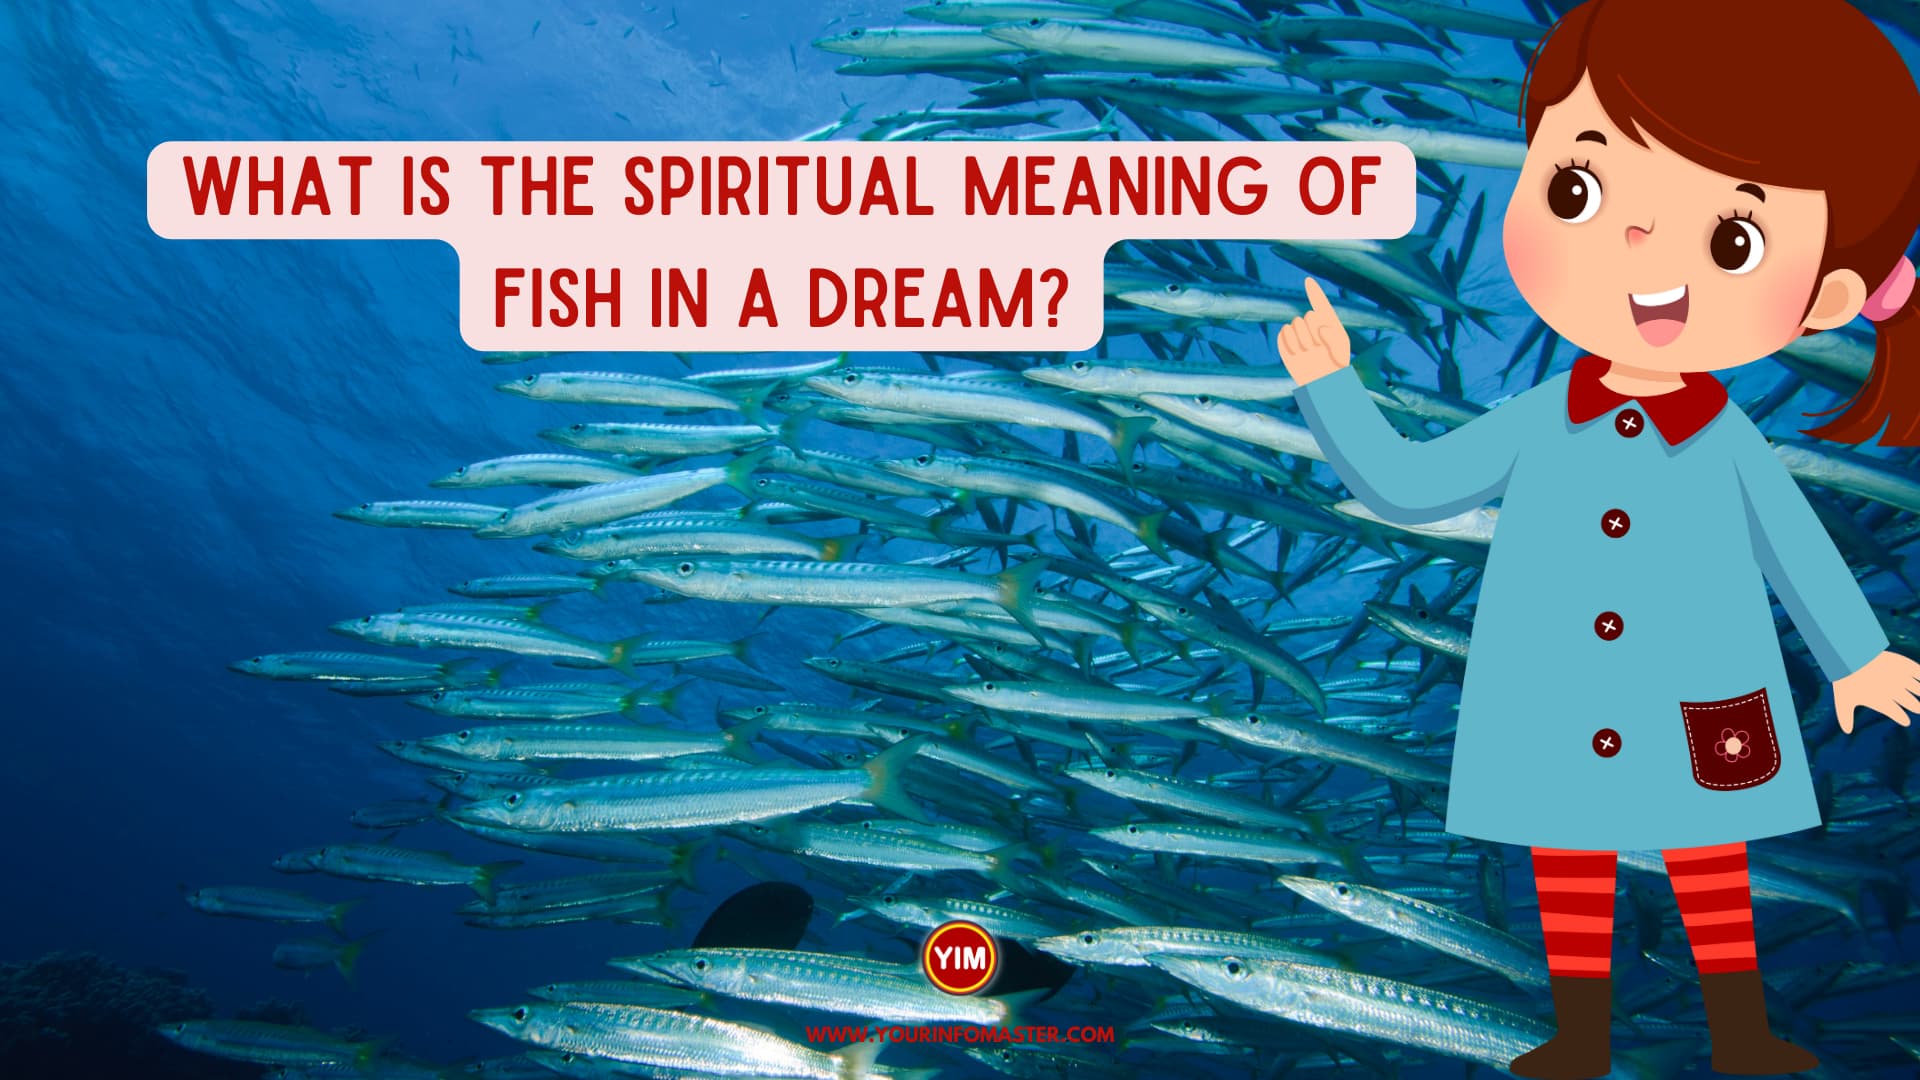 What is the spiritual meaning of fish in a dream